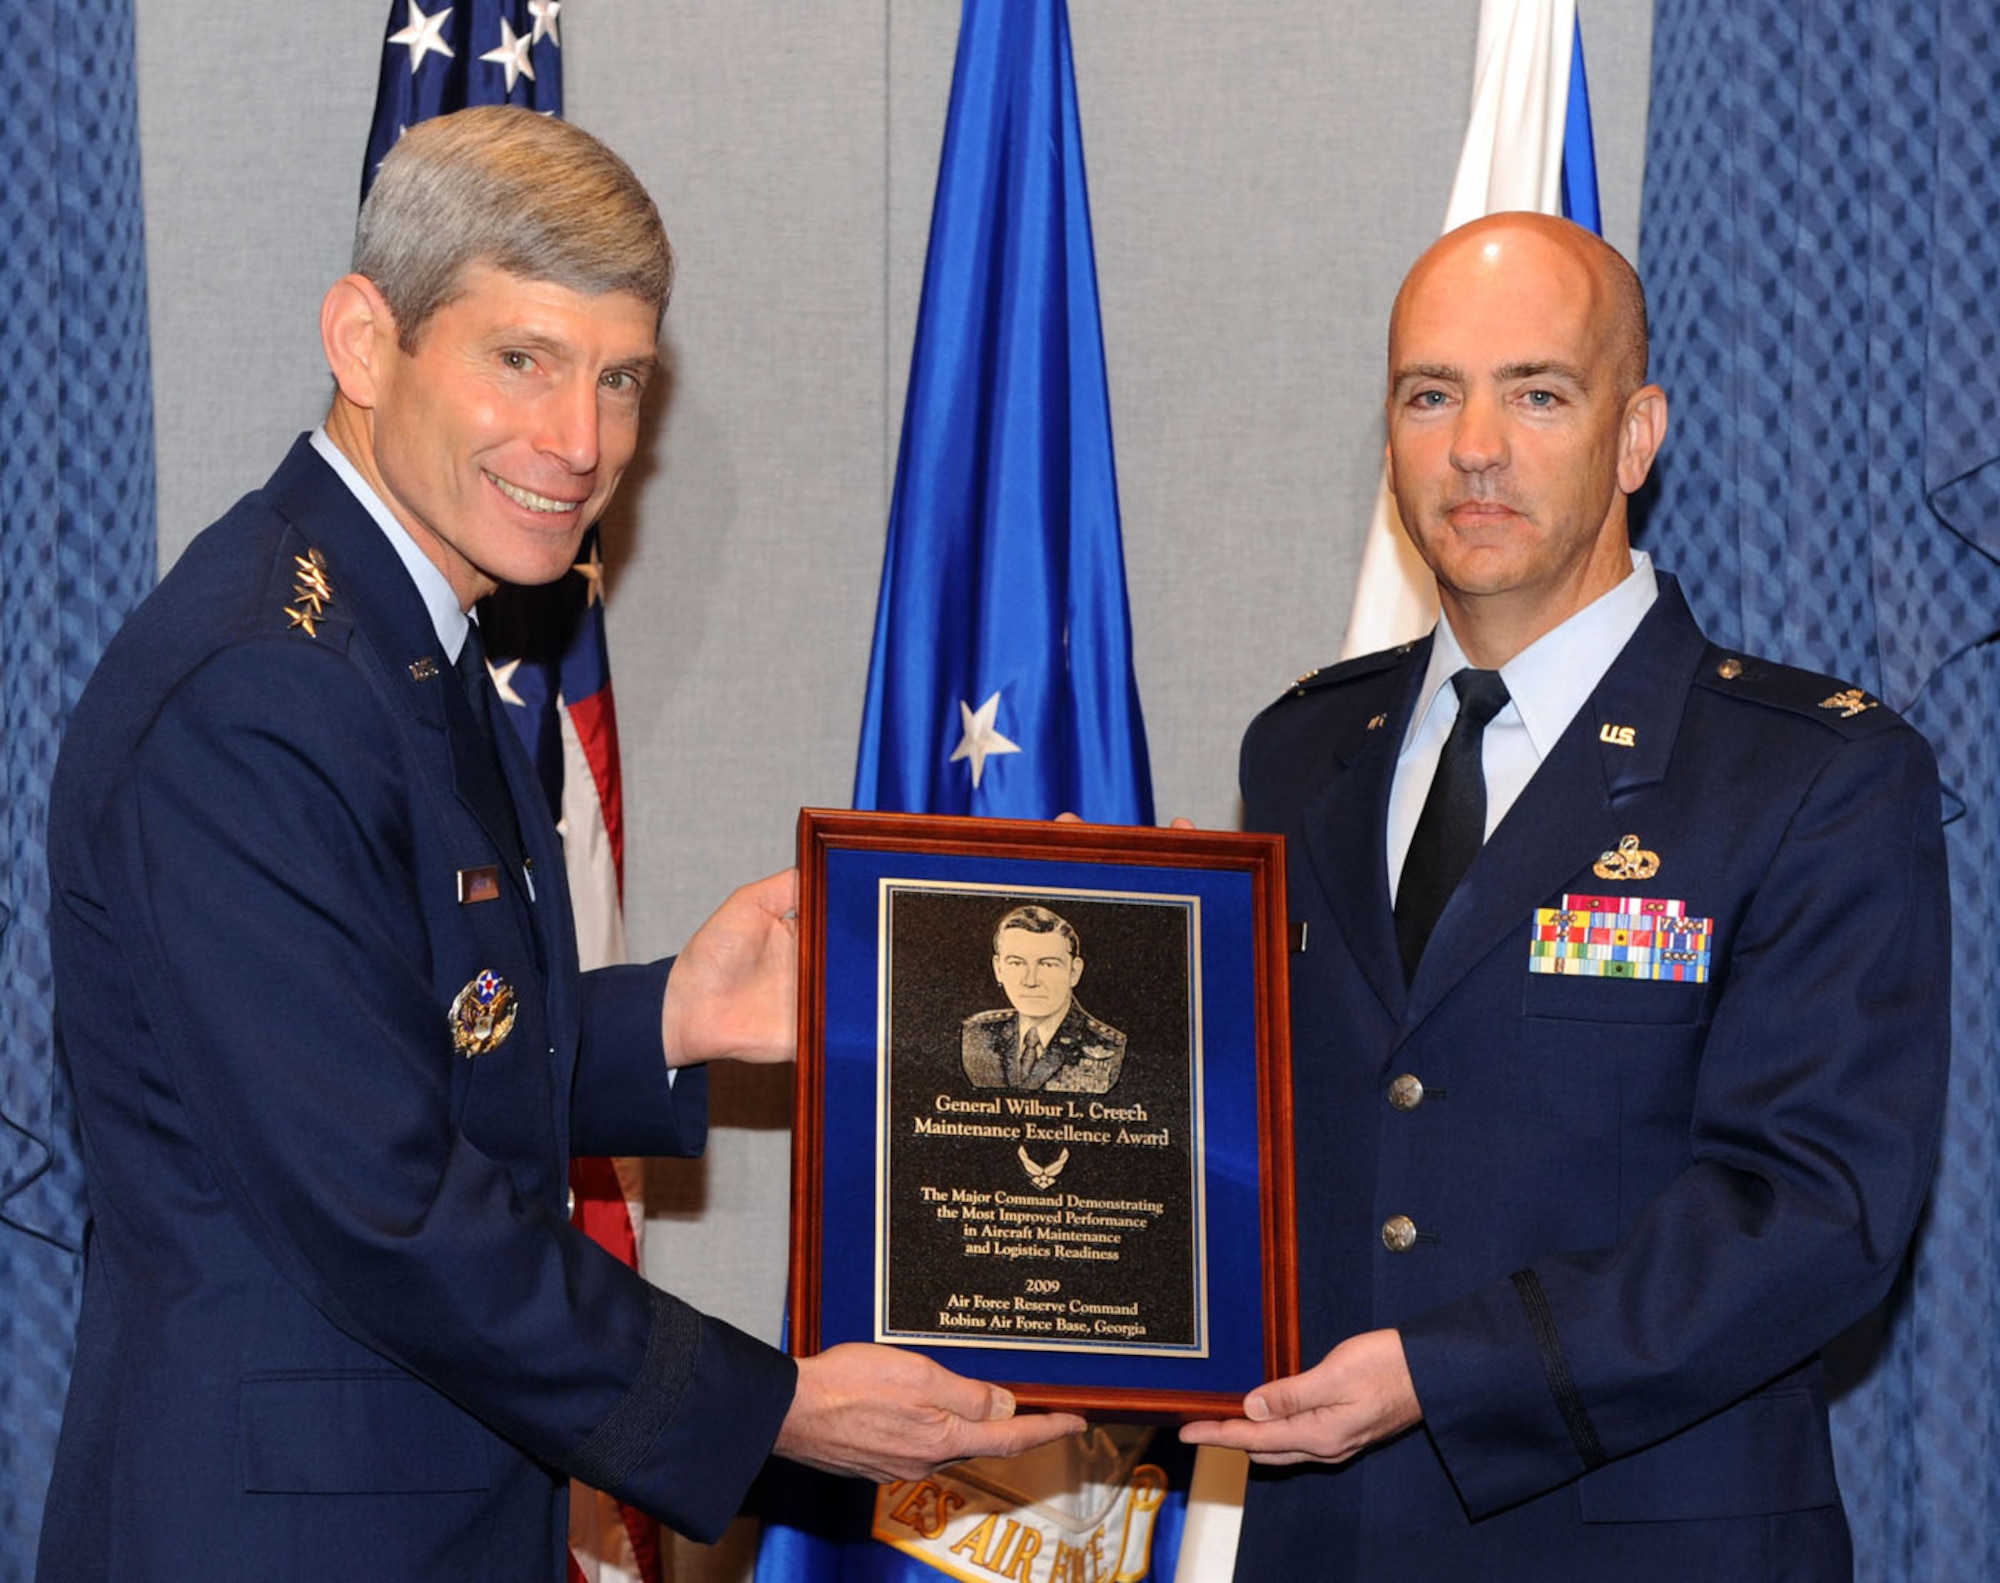 Air Force Chief of Staff Gen. Norton Schwartz presents the Gen. Wilbur L. Creech Maintenance Excellence Award for 2009 to Col. T. Glenn Davis, former A4 director of logistics for Air Force Reserve Command, on March 11, 2010. (U.S. Air Force photo)

